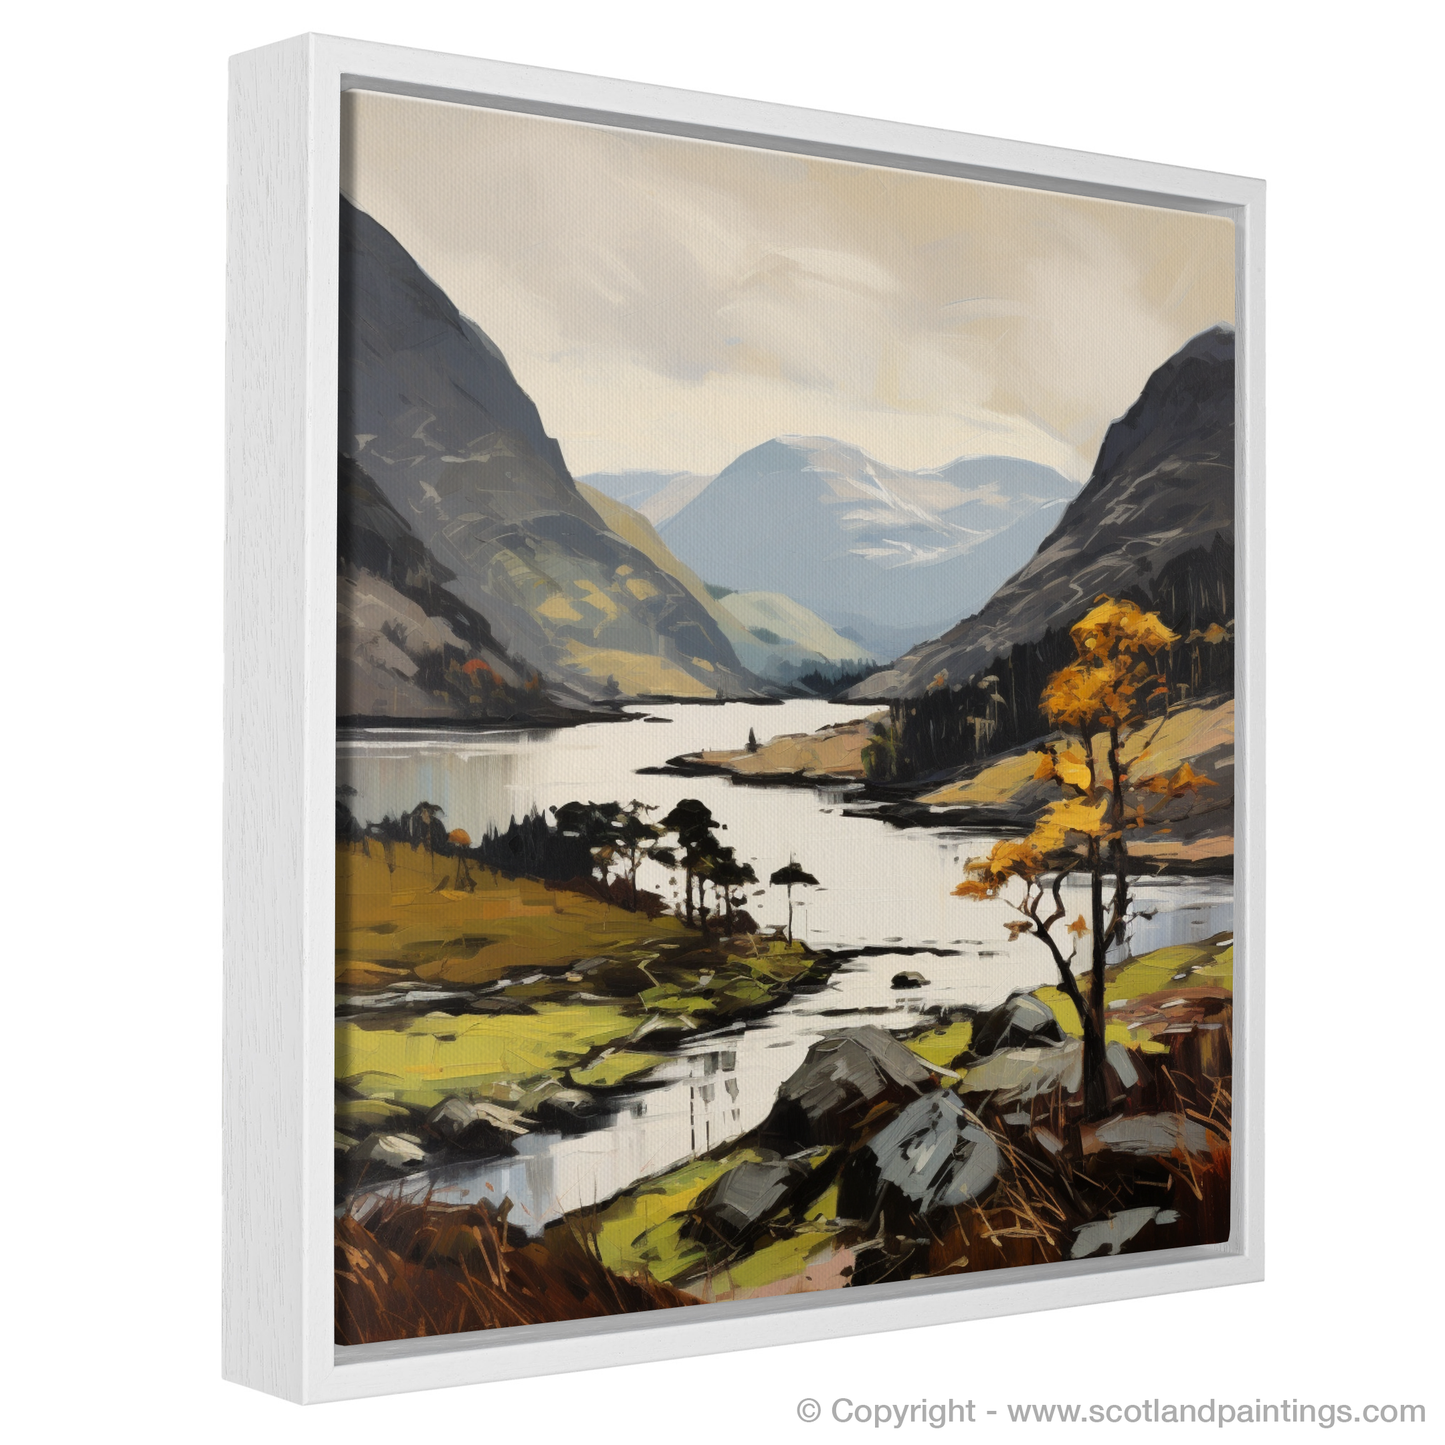 Painting and Art Print of Glenfinnan, Highlands entitled "Highland Embrace: An Expressionist Ode to Glenfinnan".